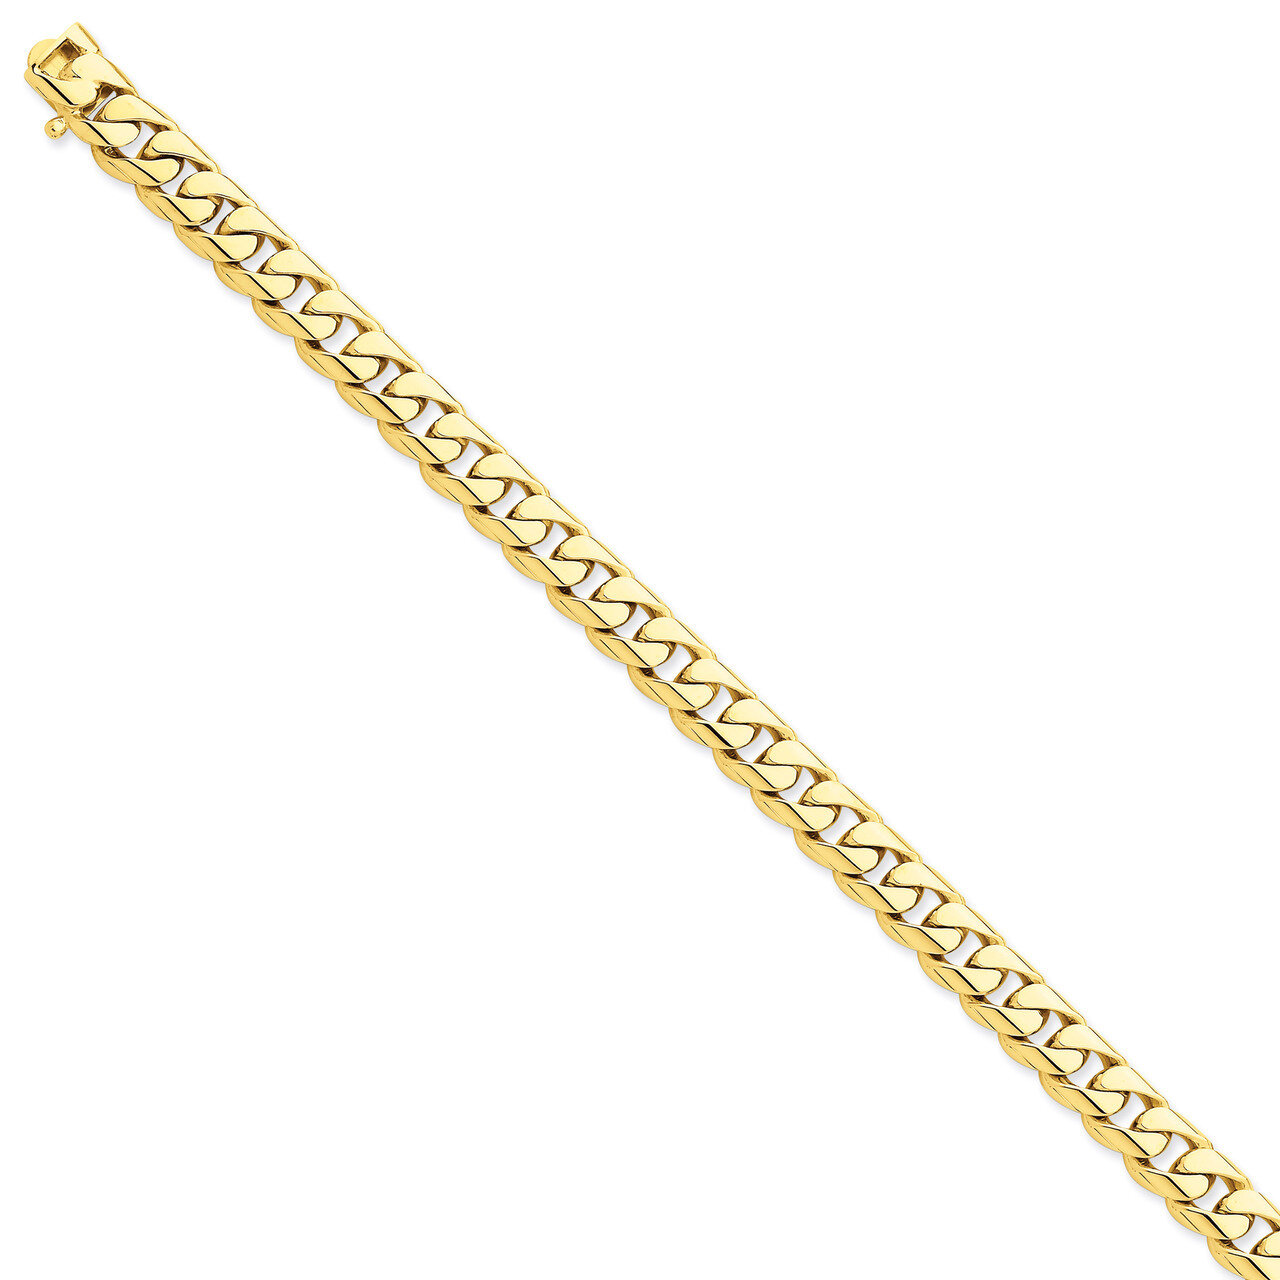 8.75mm Hand-polished Rounded Curb Chain 9 Inch 14k Gold LK125-9